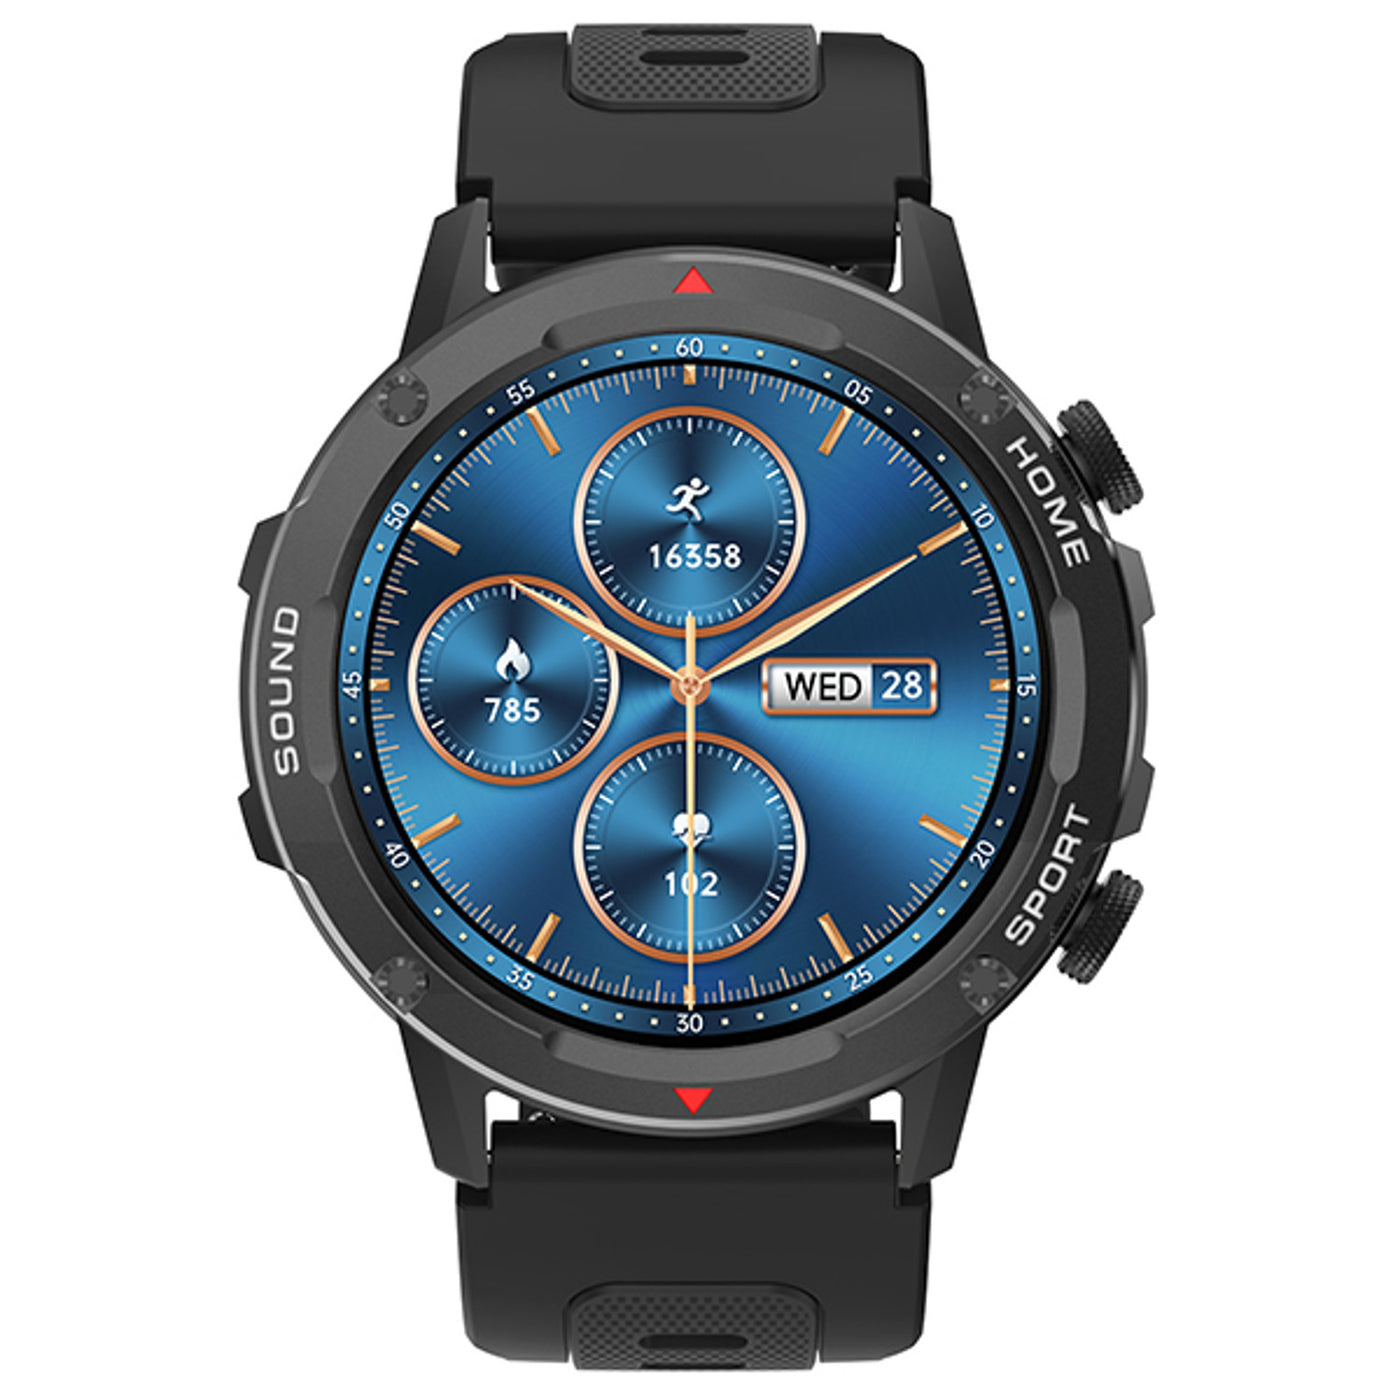 Smartwatch Tracer, Bluetooth 5.2 BLE, 1,39'' IPS, SMR11 HERO